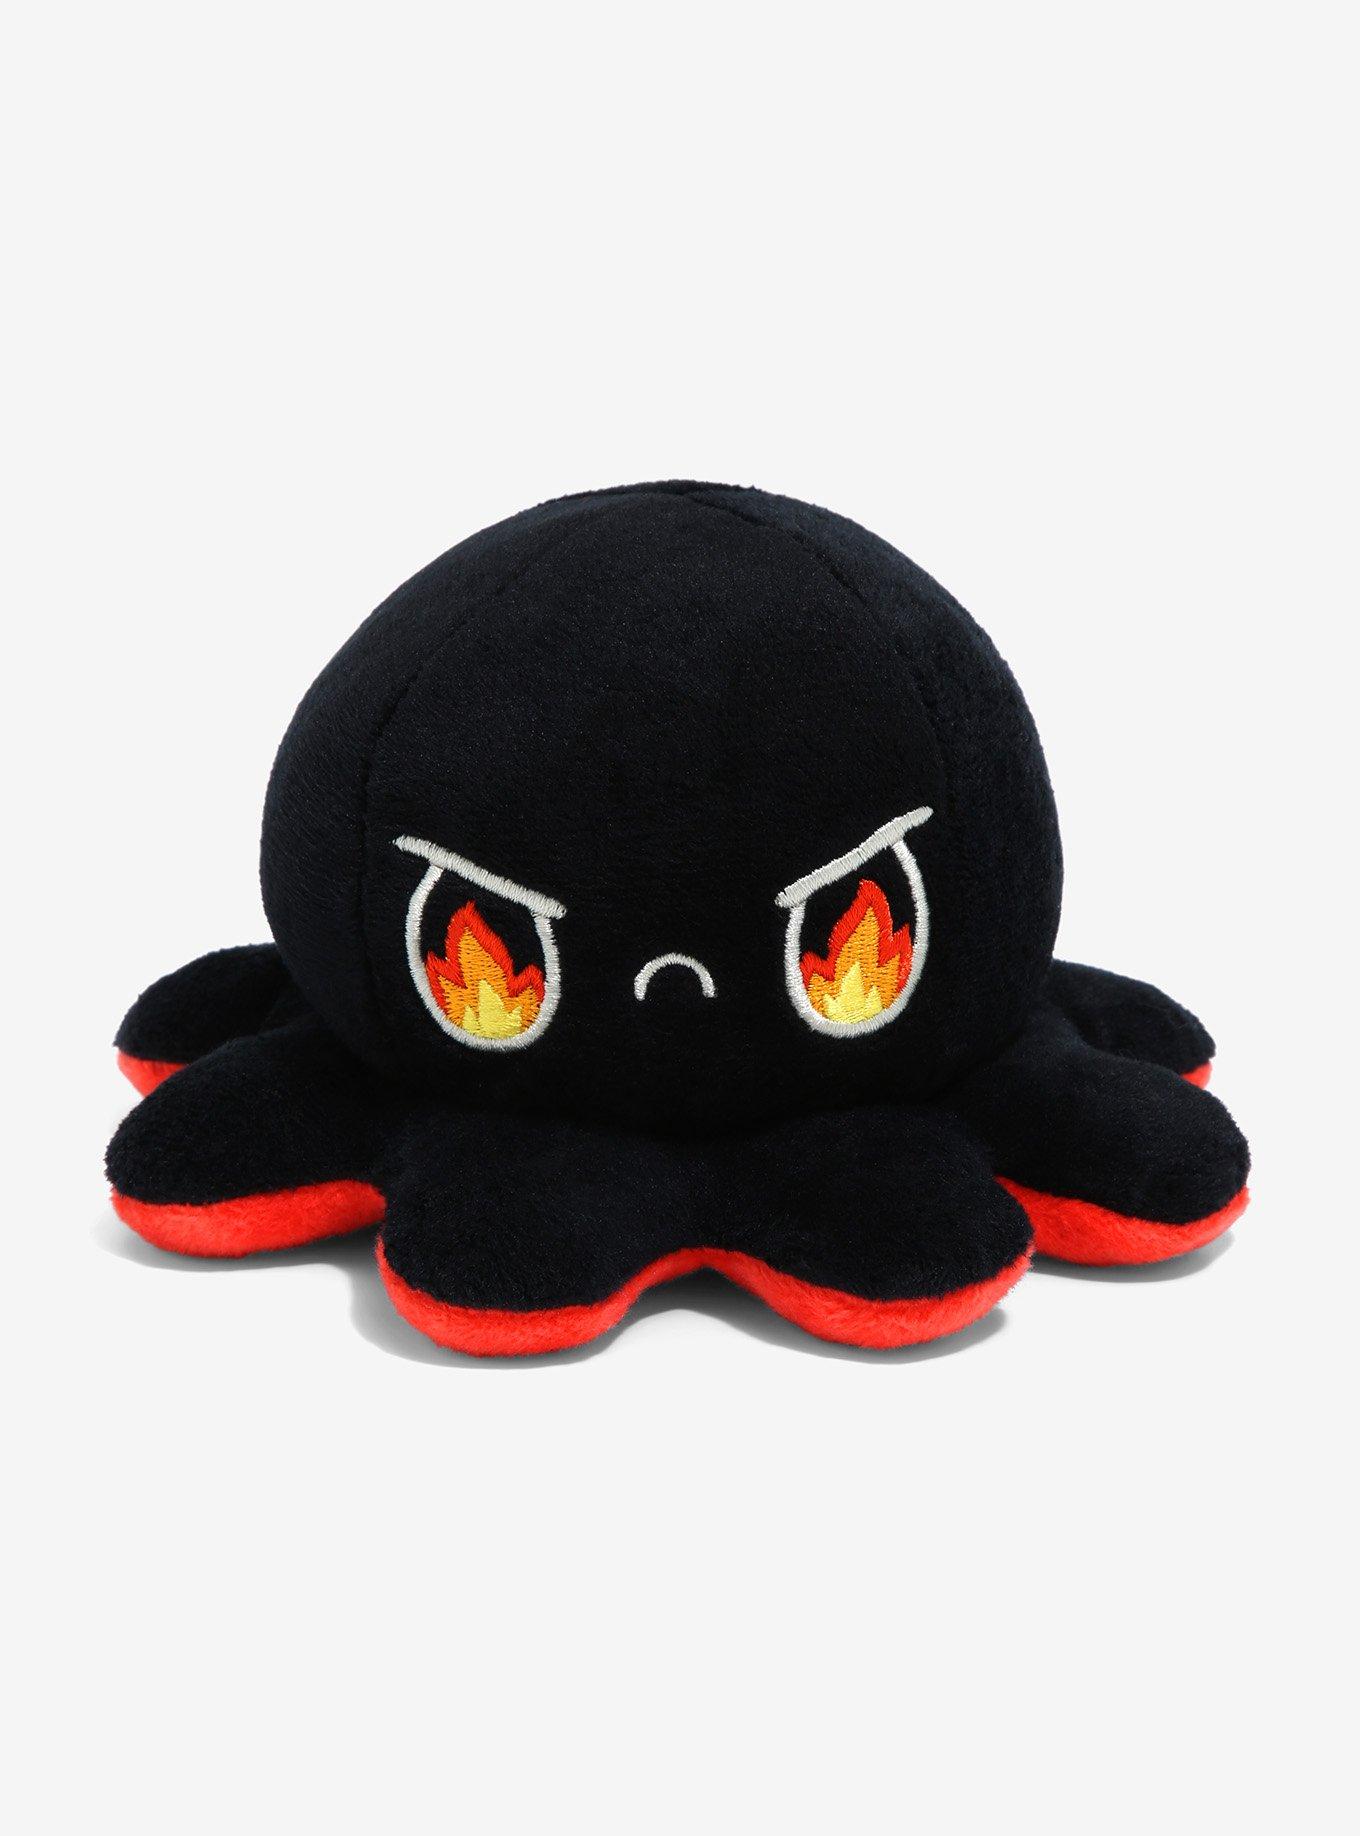 Tee Turtle Rage + Angry Reversible Octopus 5 Inch Plush